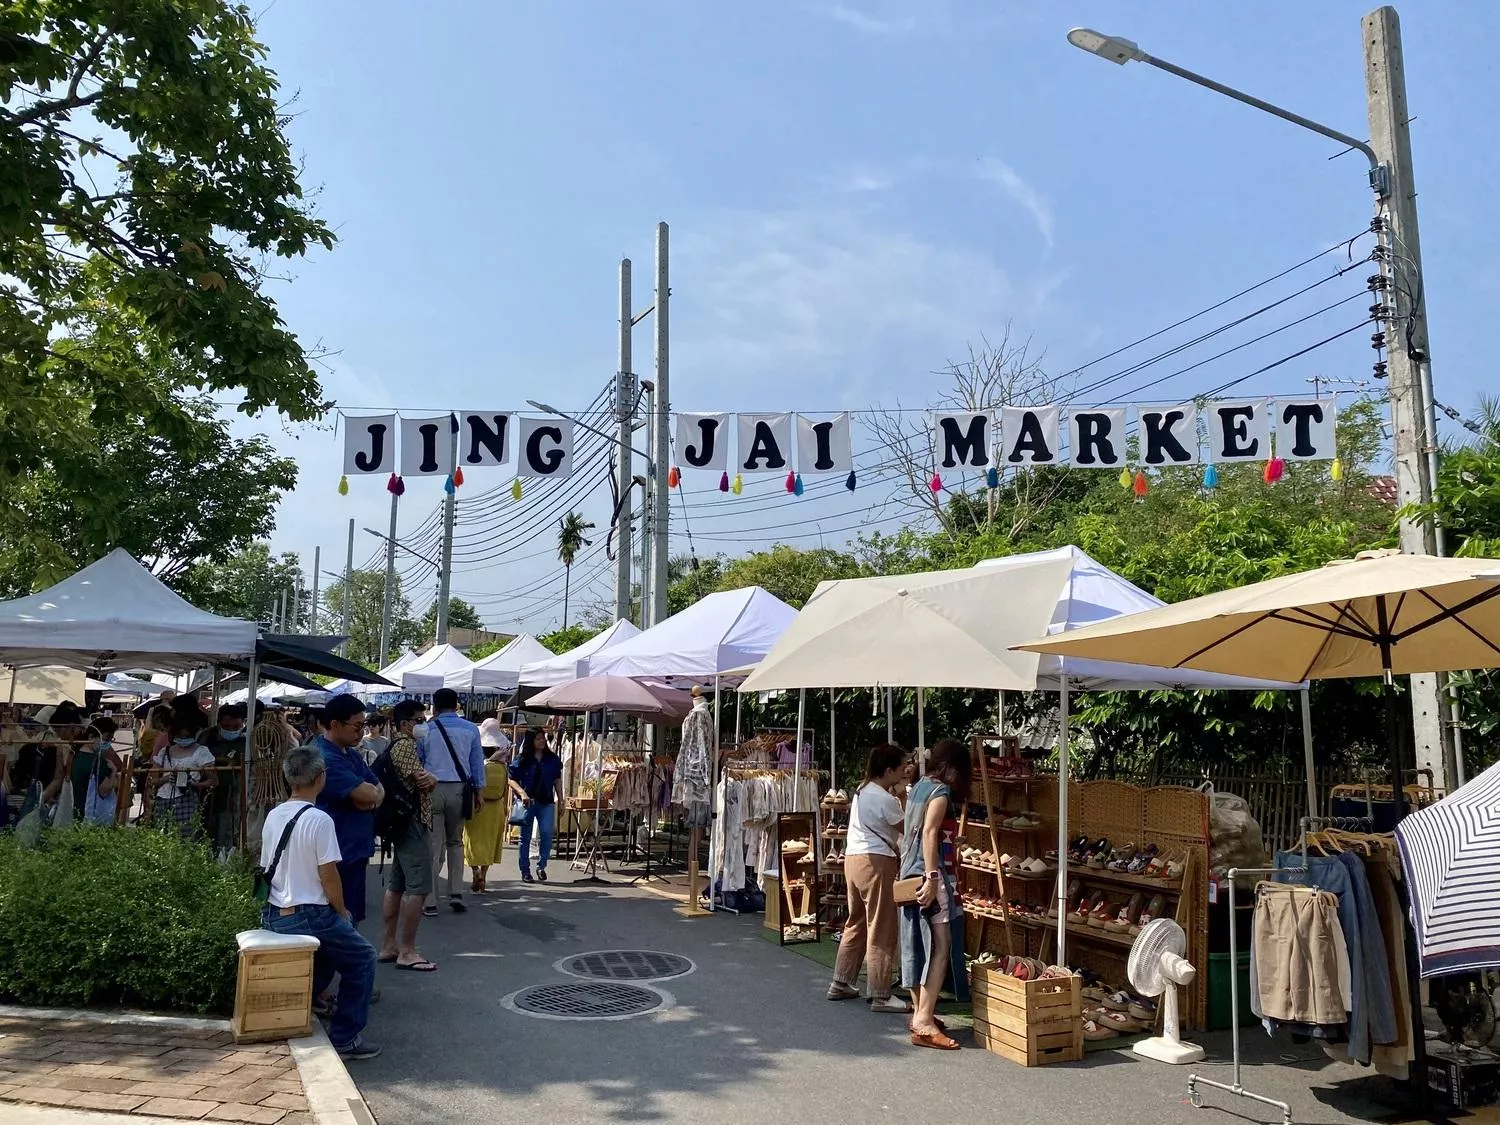 Jing Jai Market letters hanging above the market stand